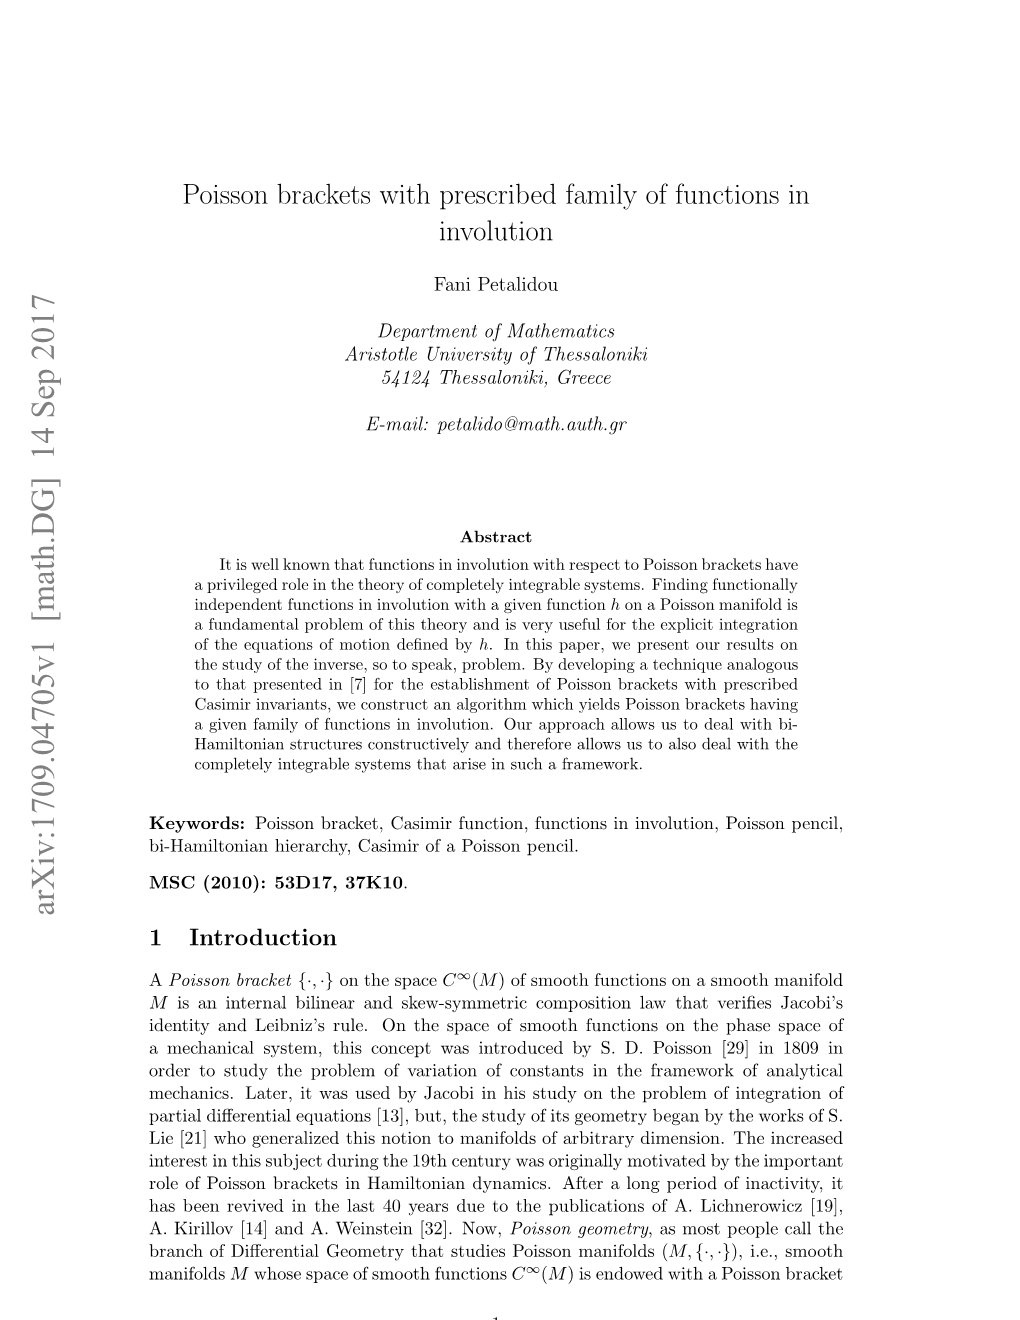 Poisson Brackets with Prescribed Family of Functions in Involution